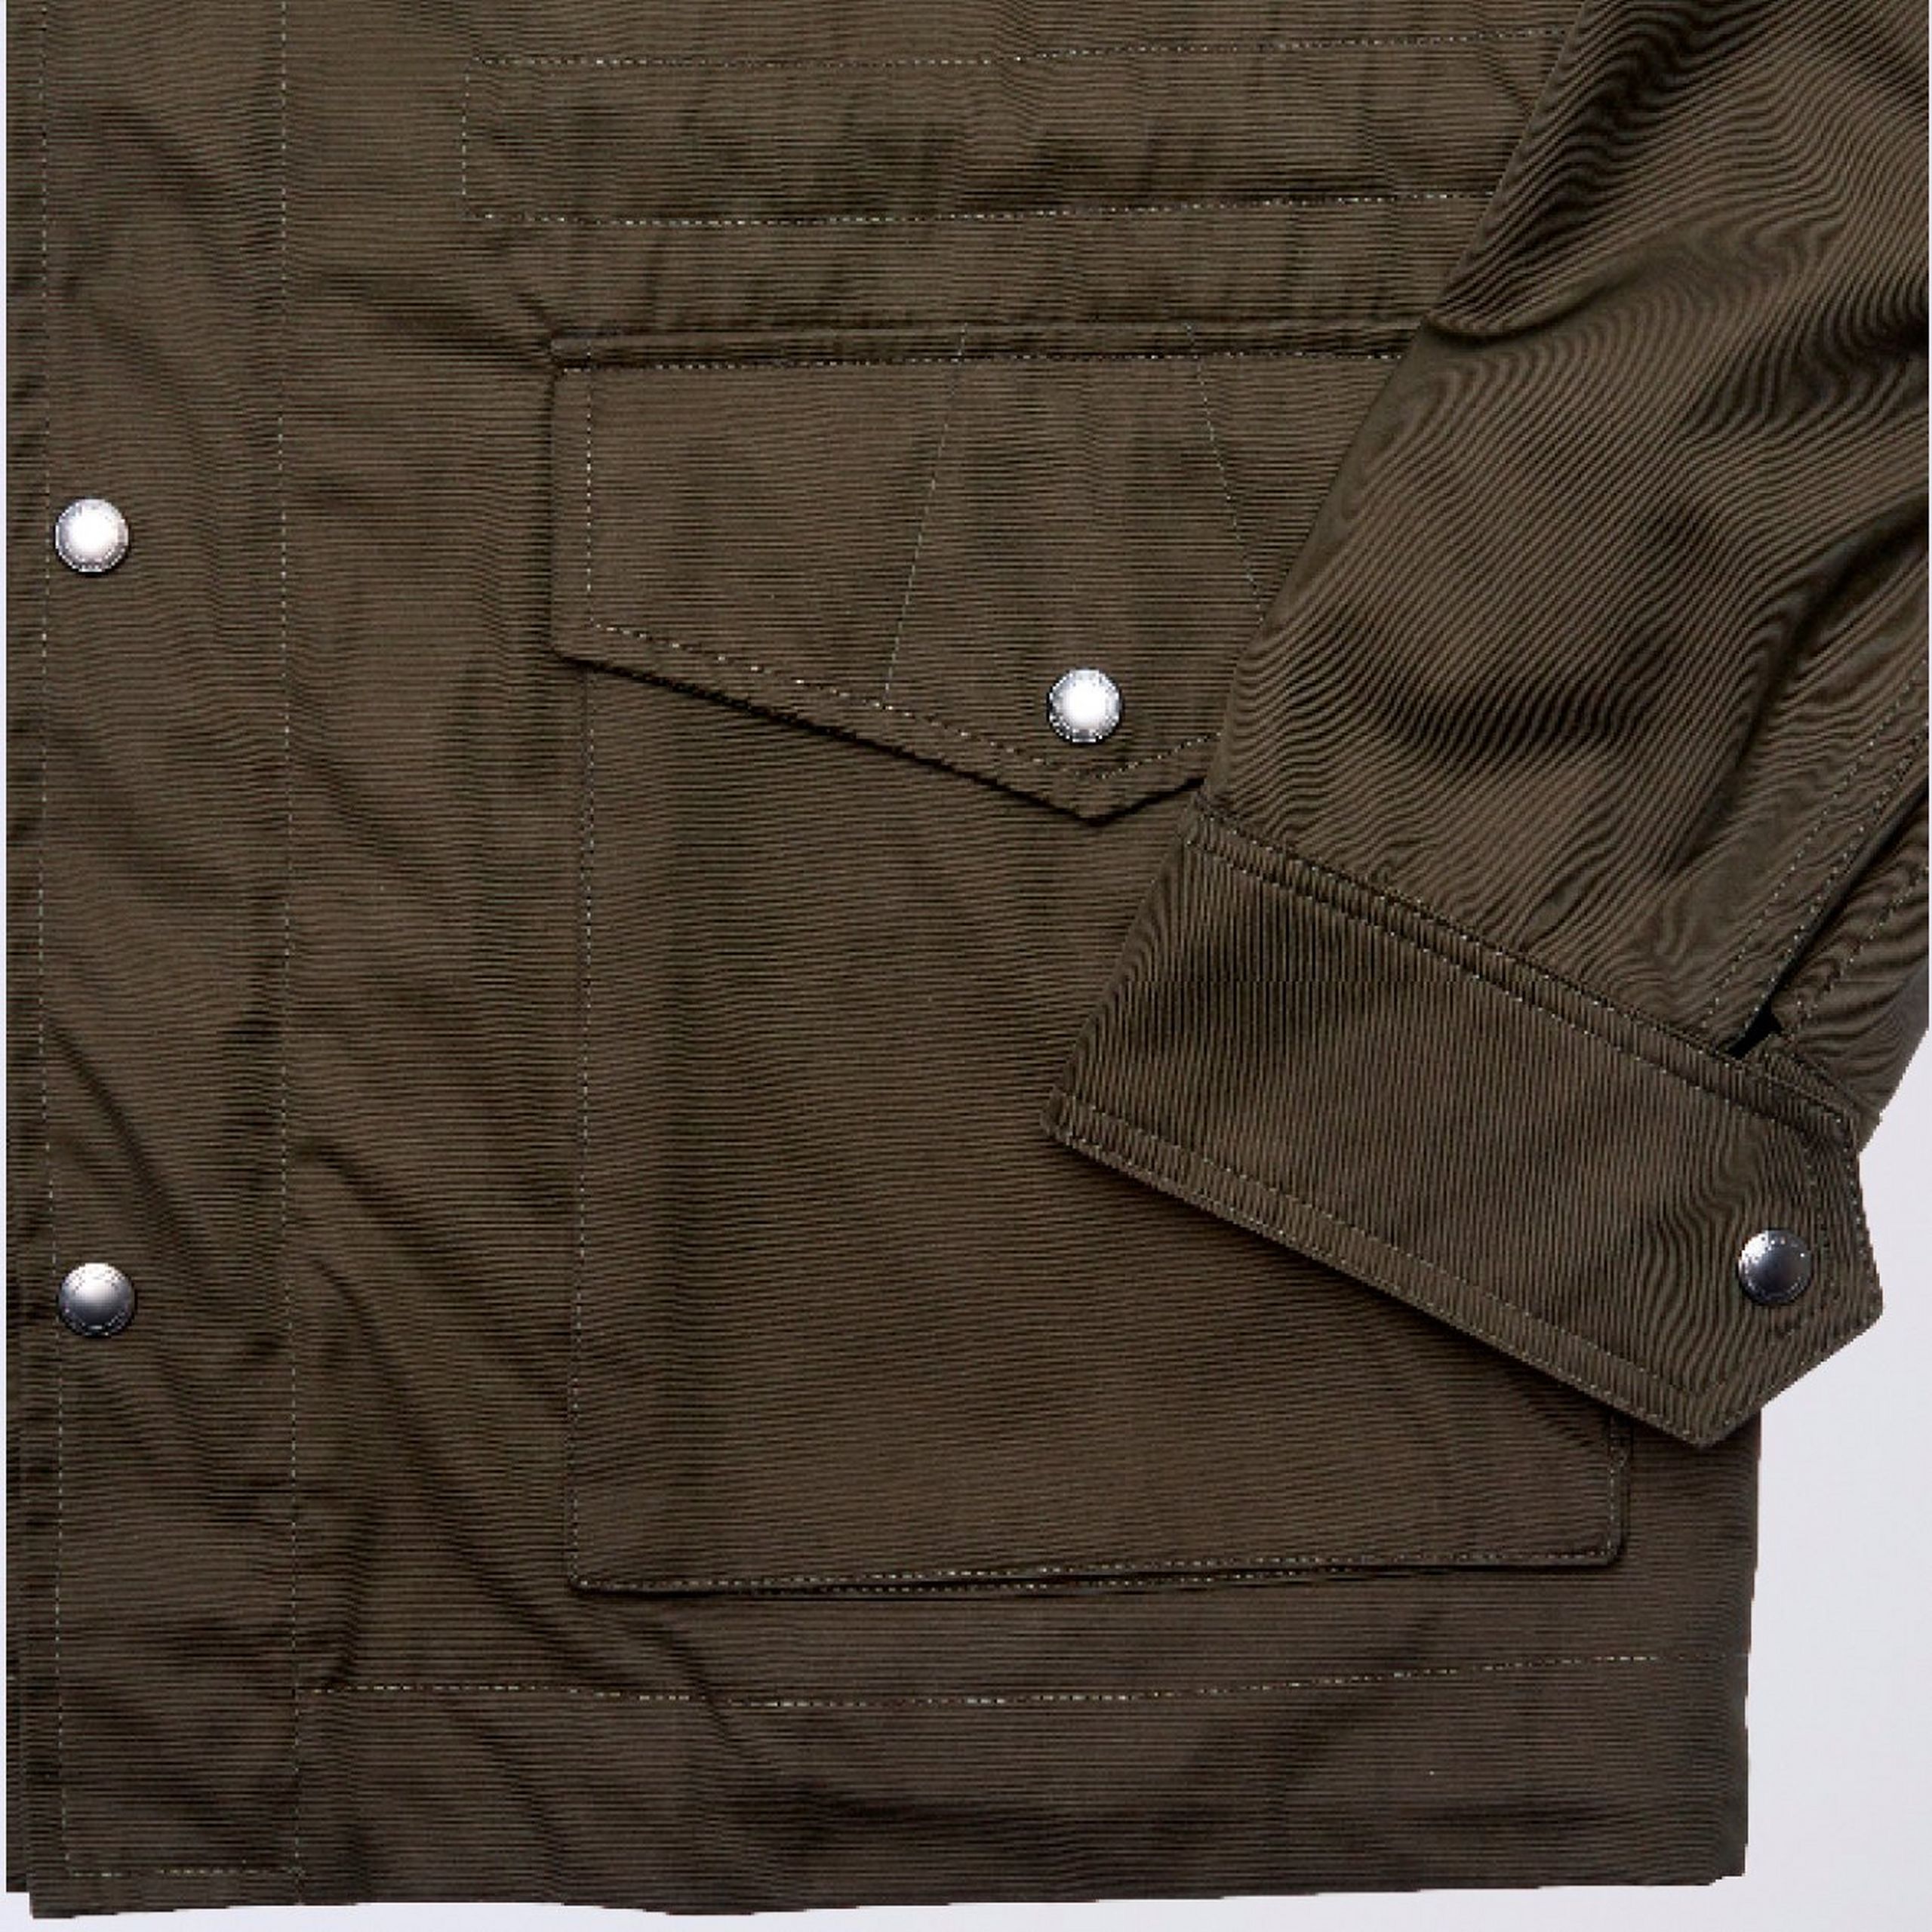 Close up of Thomas Pink's M65 Jacket in Olive Green